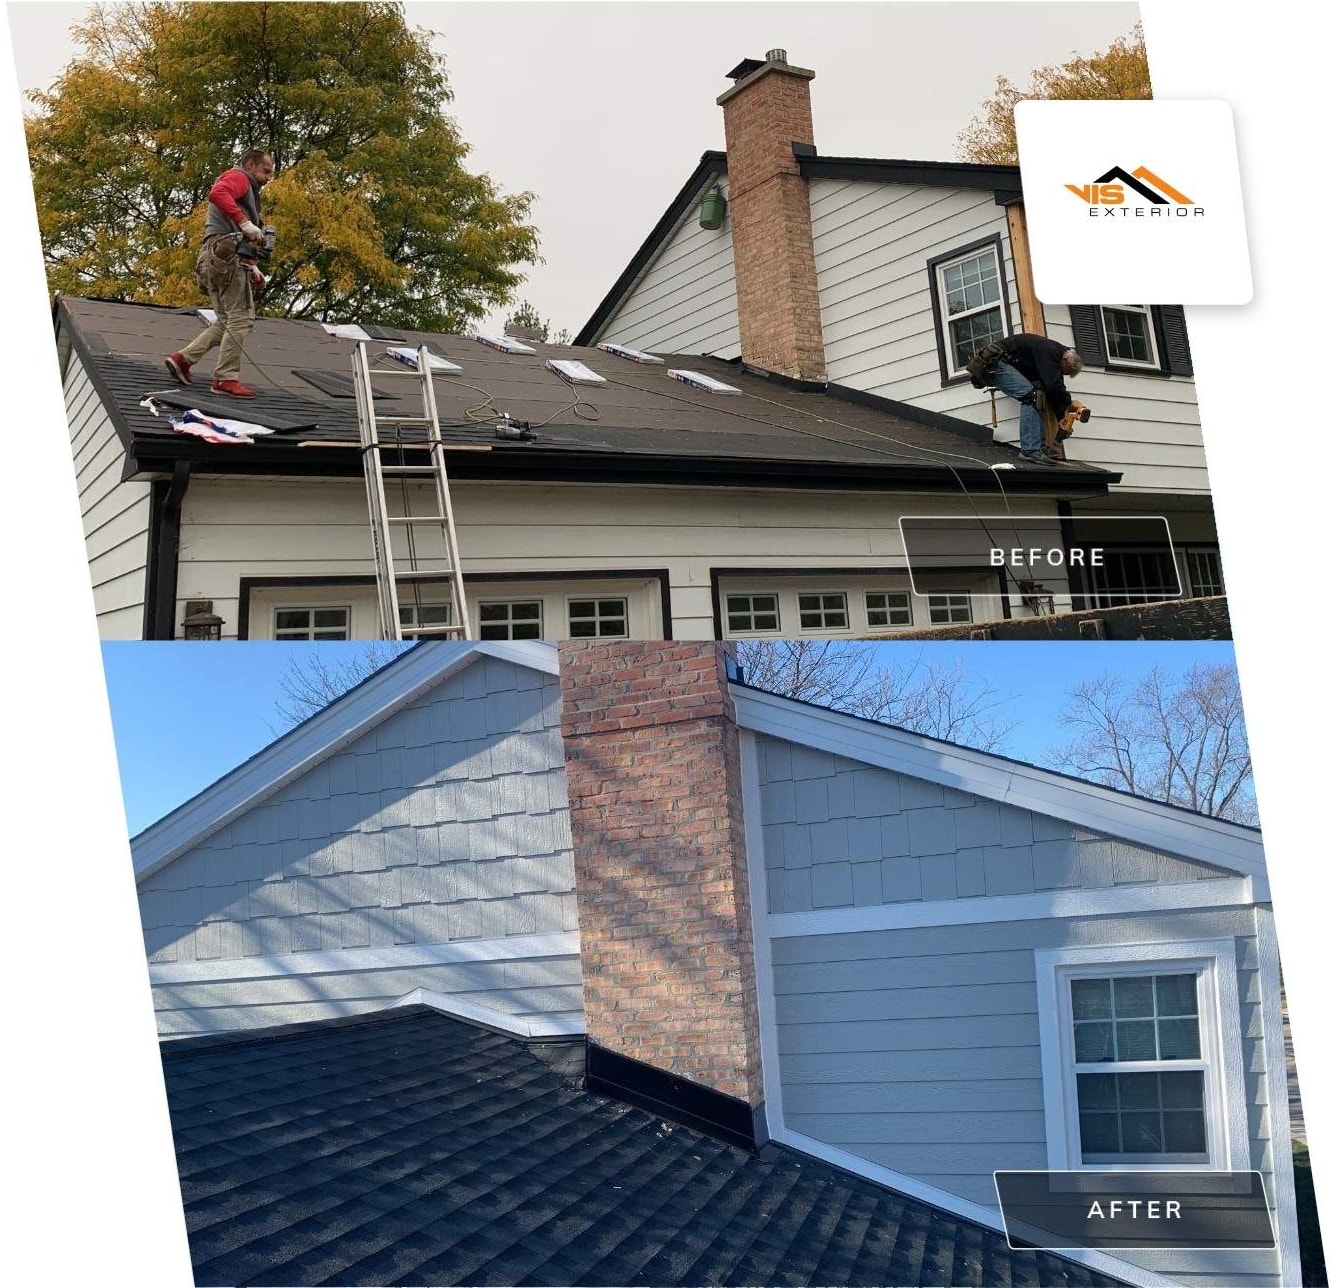 LP SmartSide Shake siding and GAF shingle roof installation in Hinsdale before after project photo